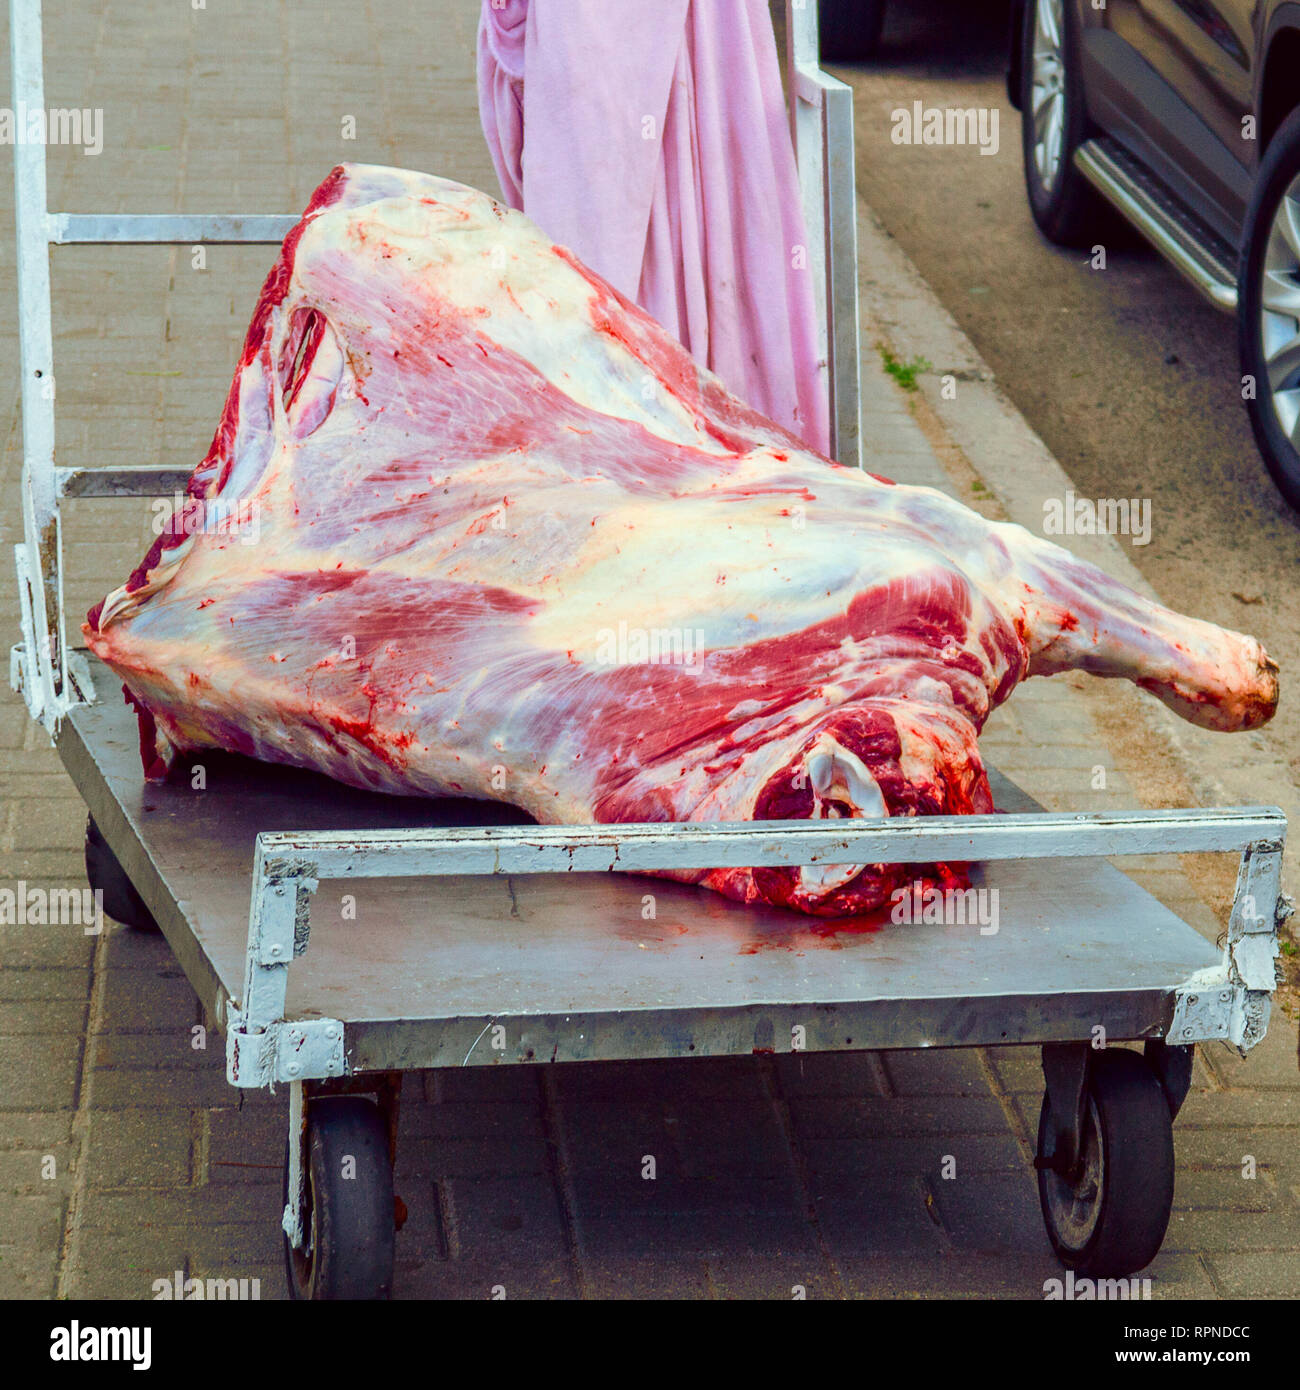 large, fresh carcass of meat lies on a cart on the street Stock Photo